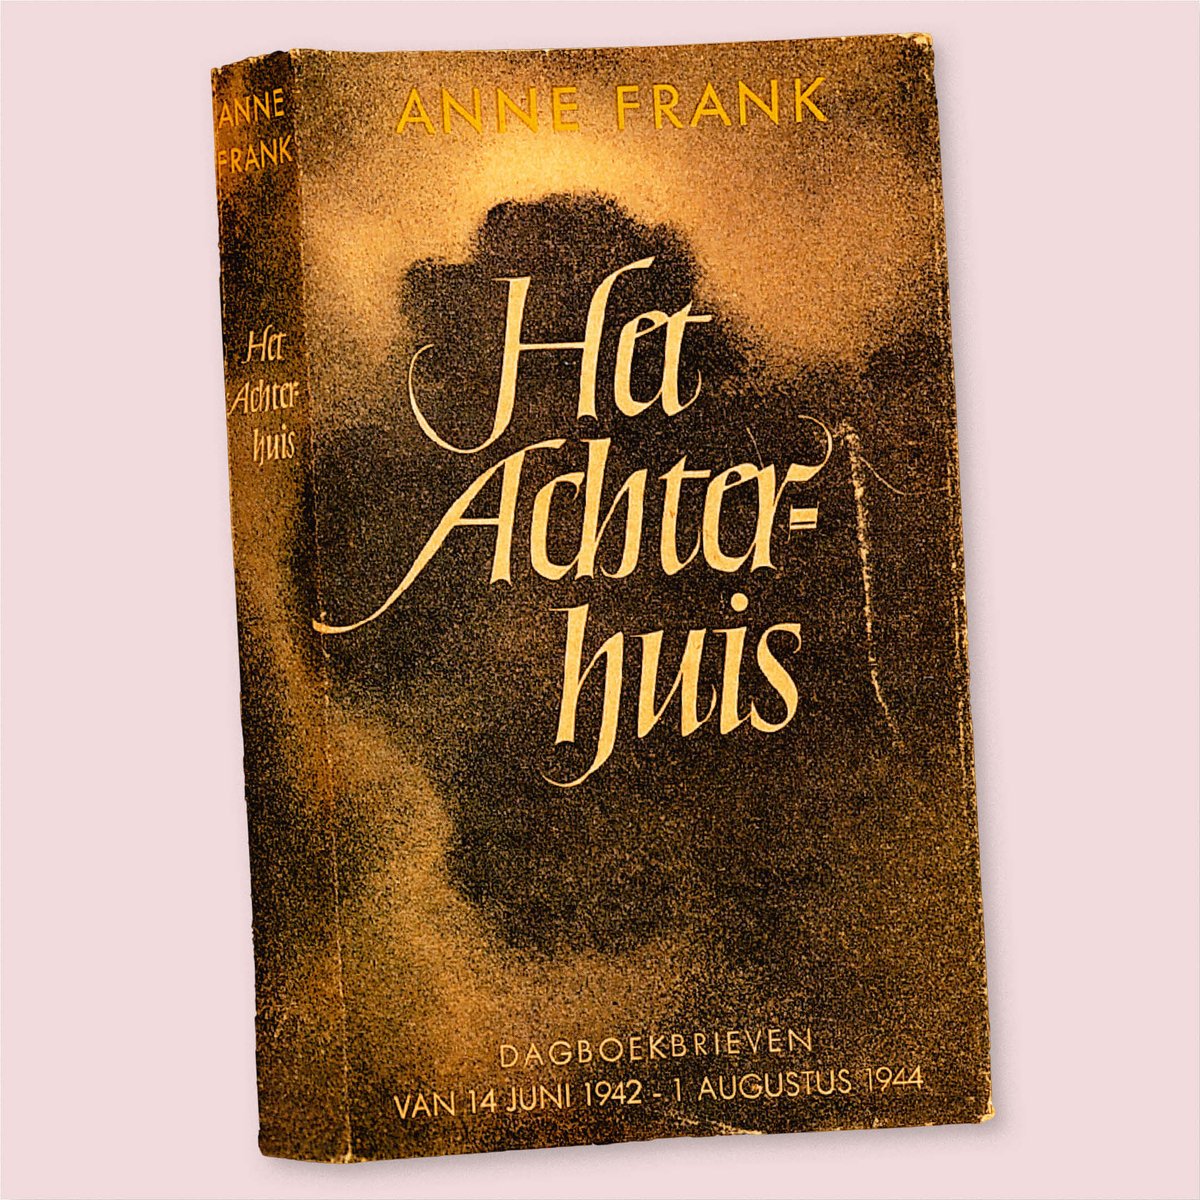 #Onthisday June 25, 1947, Anne Frank's diary is published for the first time in the Netherlands. She had come up with the title of the book herself: Het Achterhuis (The Secret Annex). #diaryannefrank